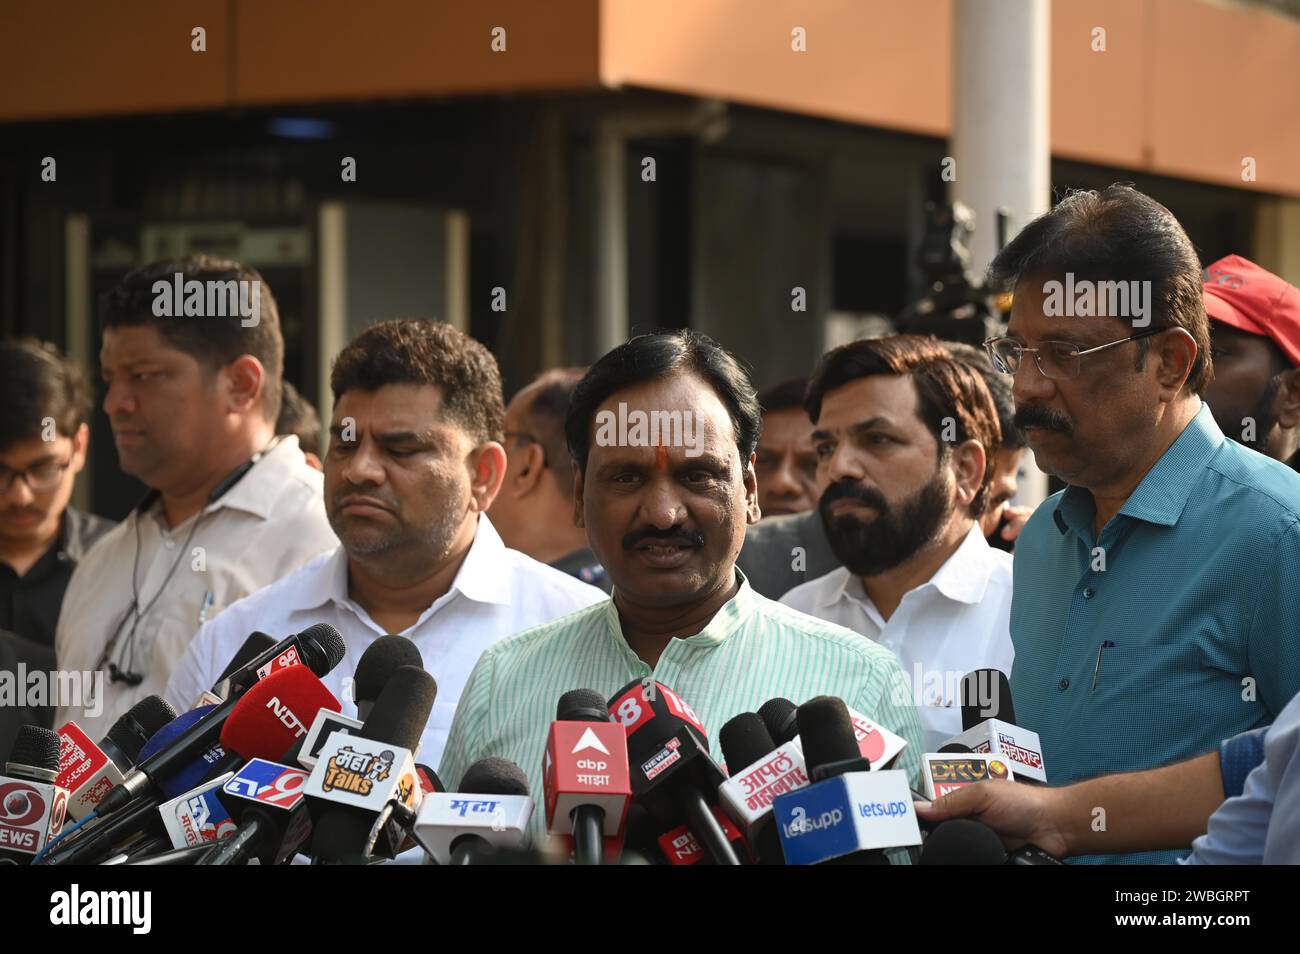 MUMBAI, INDIA - JANUARY 10: Shiv Sena (UBT) MLAs Sunil Prabhu, and Amdadas Danve, addressing the media, at Vidhan Bhavan on January 10, 2024 in Mumbai, India. The Maharashtra Legislative Assembly Speaker Rahul Narwekar today held that Eknath Shinde led faction was the real Shiv Sena when the rival faction emerged within the party on June 22, 2022. He has refused to disqualify any member from both the factions, led by Shinde and Uddhav Thackeray. Both the factions had filed 34 petitions against each other before the speaker in 2022, seeking the disqualification of 54 MLAs in total. (Photo by B Stock Photo